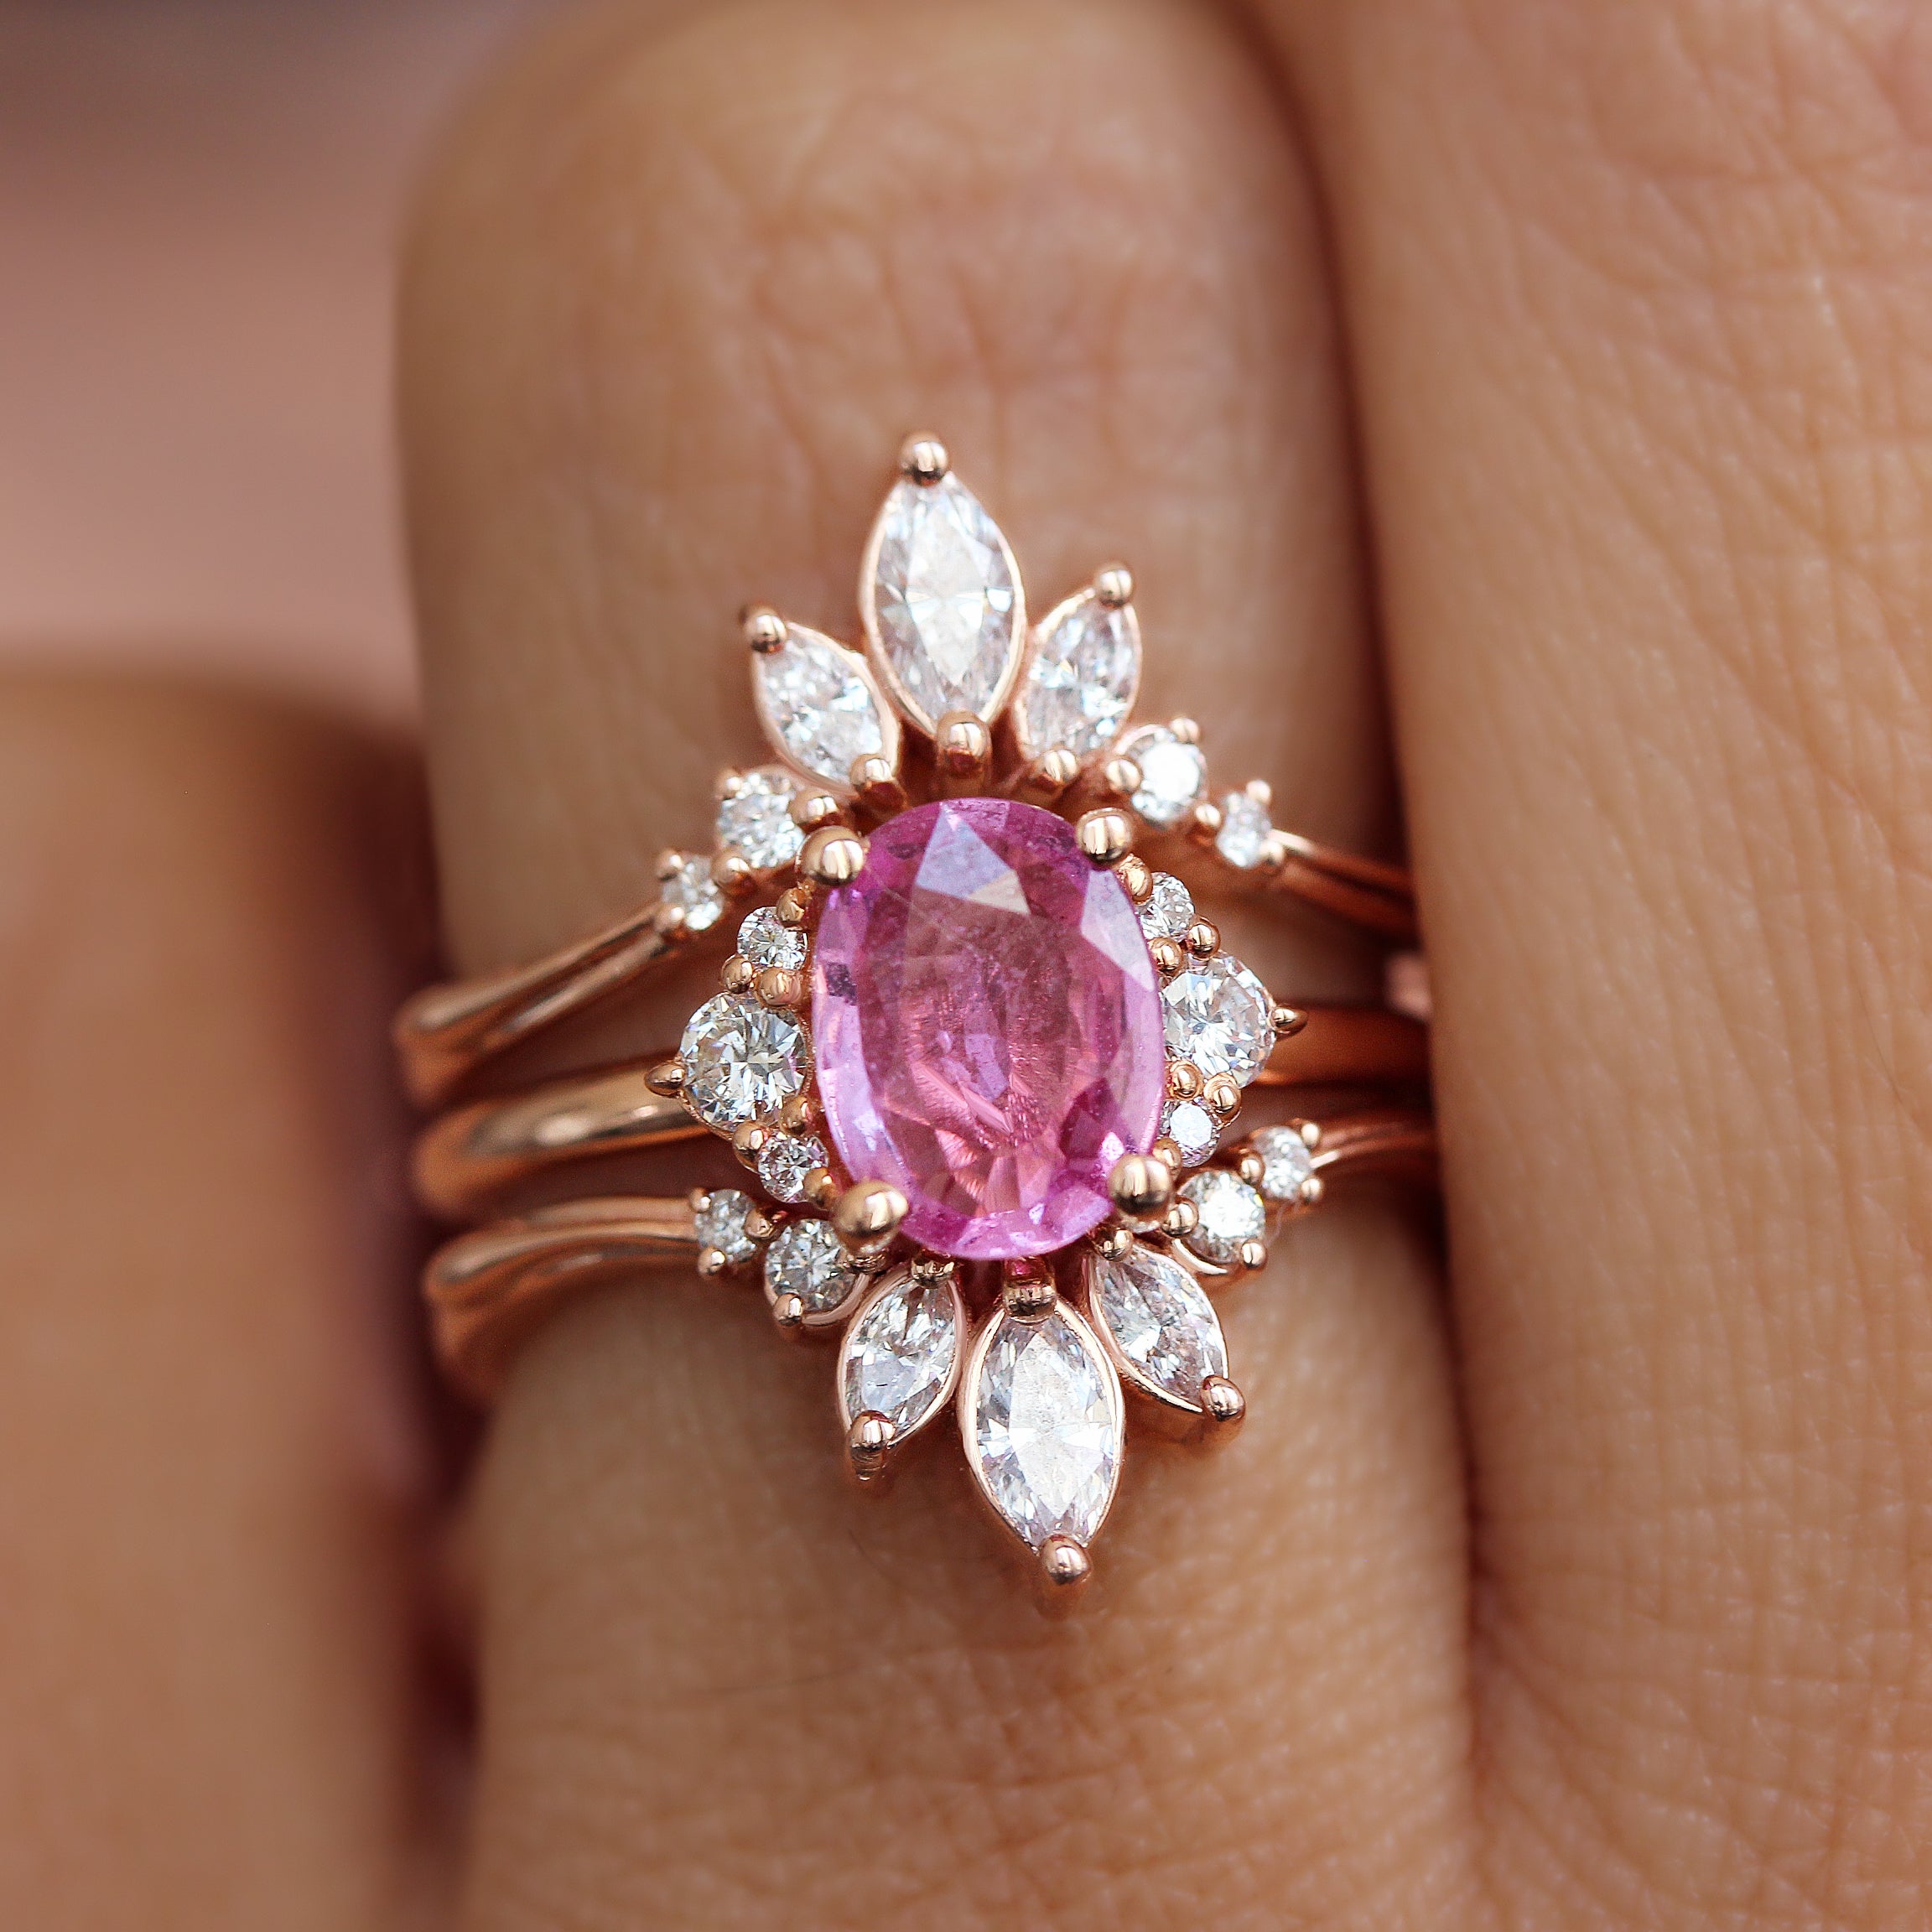 Oval Pink Sapphire Engagement Ring With Diamond Ring Guard Enhancer, Bridal Ring Set - Isabella & Danielle